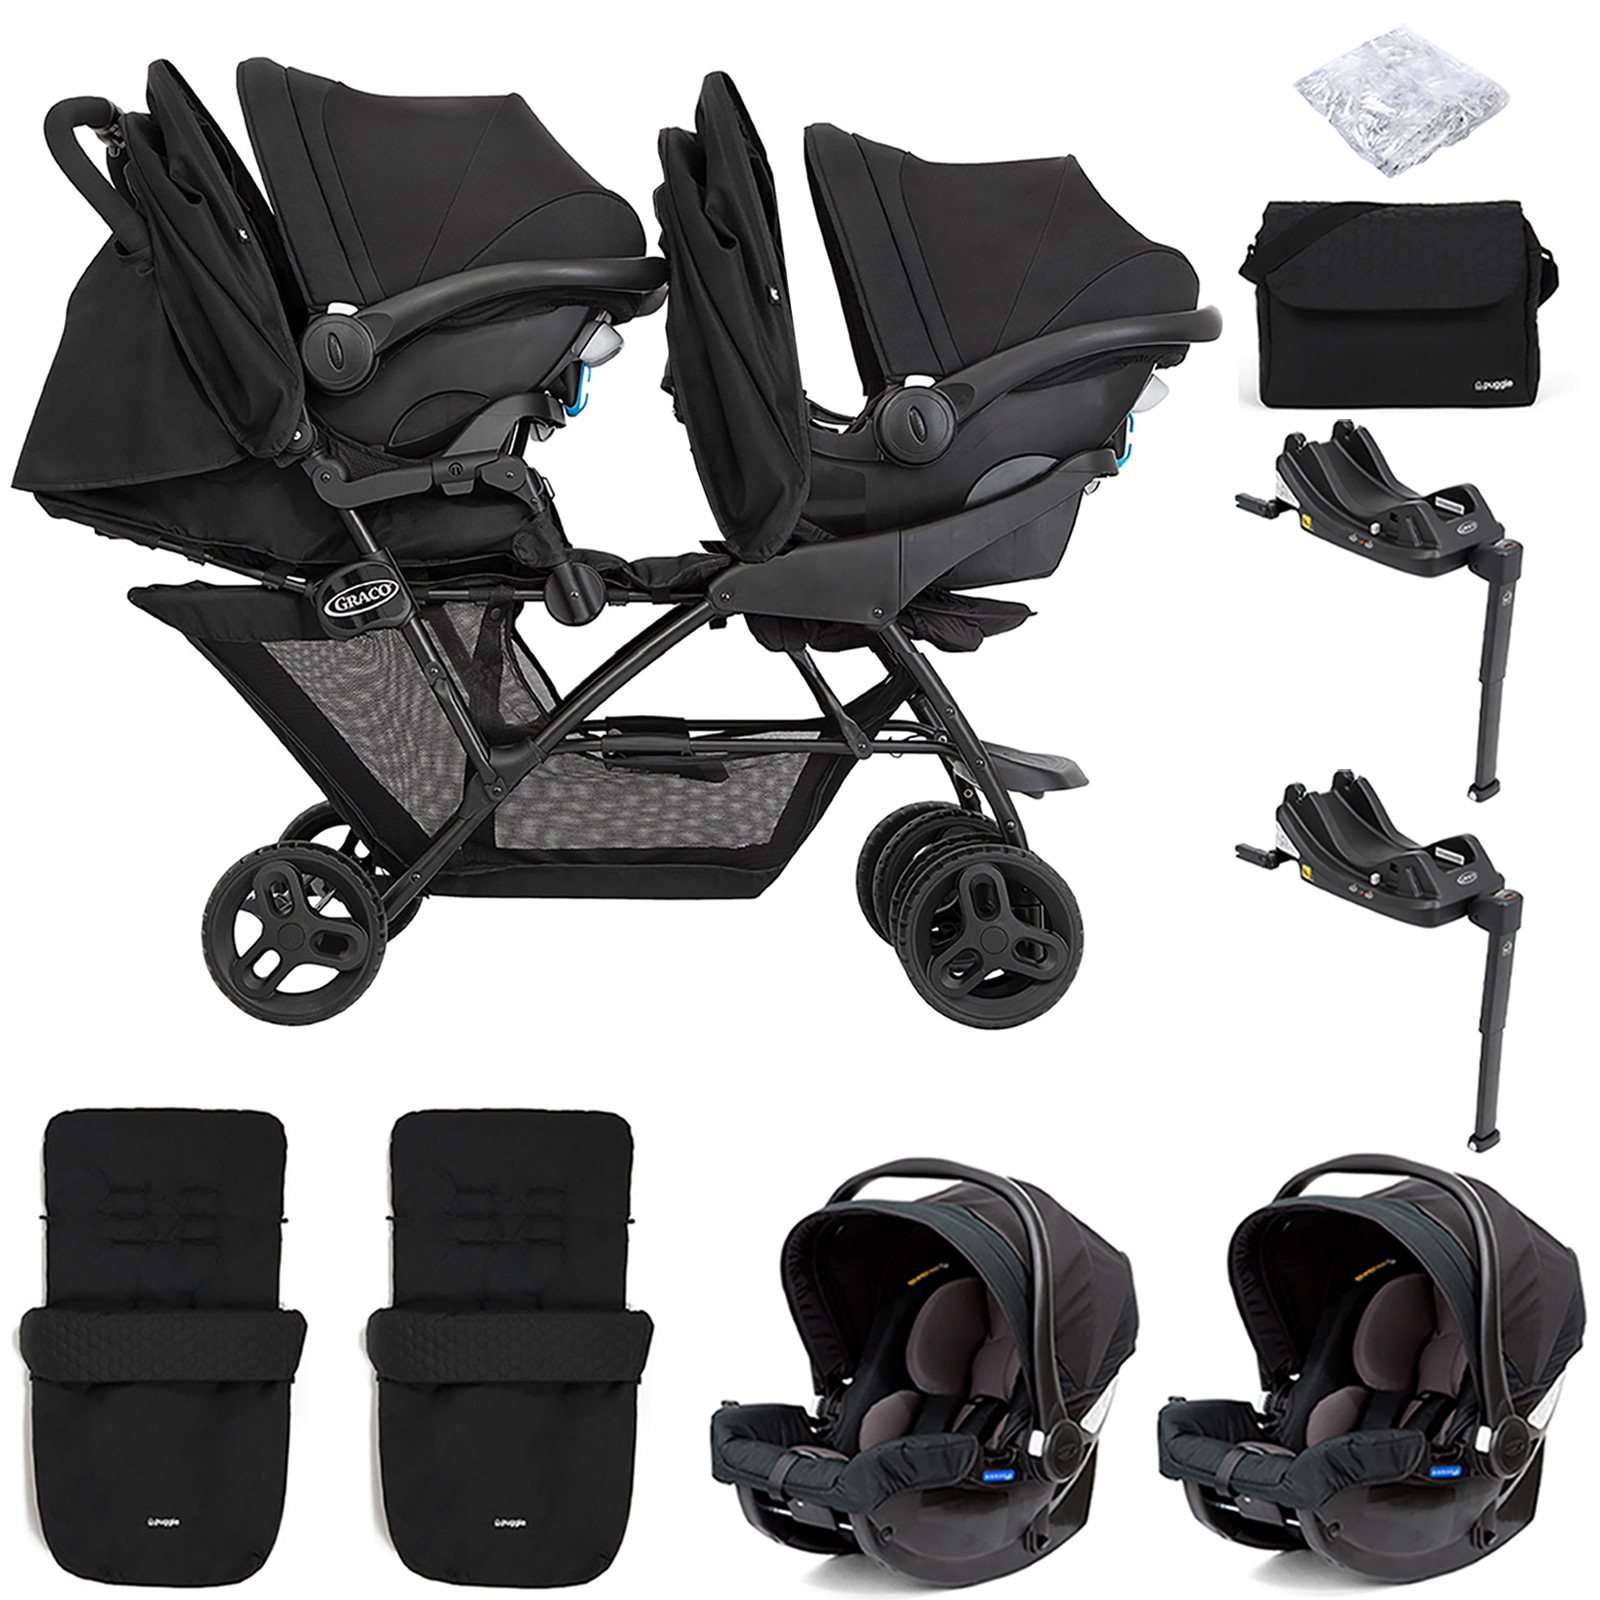 Graco Blaaze™ Stadium Duo Tandem Travel System with Front Apron, Raincover, 2 Footmuffs, Changing Bag, 2 Car Seats & 2 Bases - Night Sky